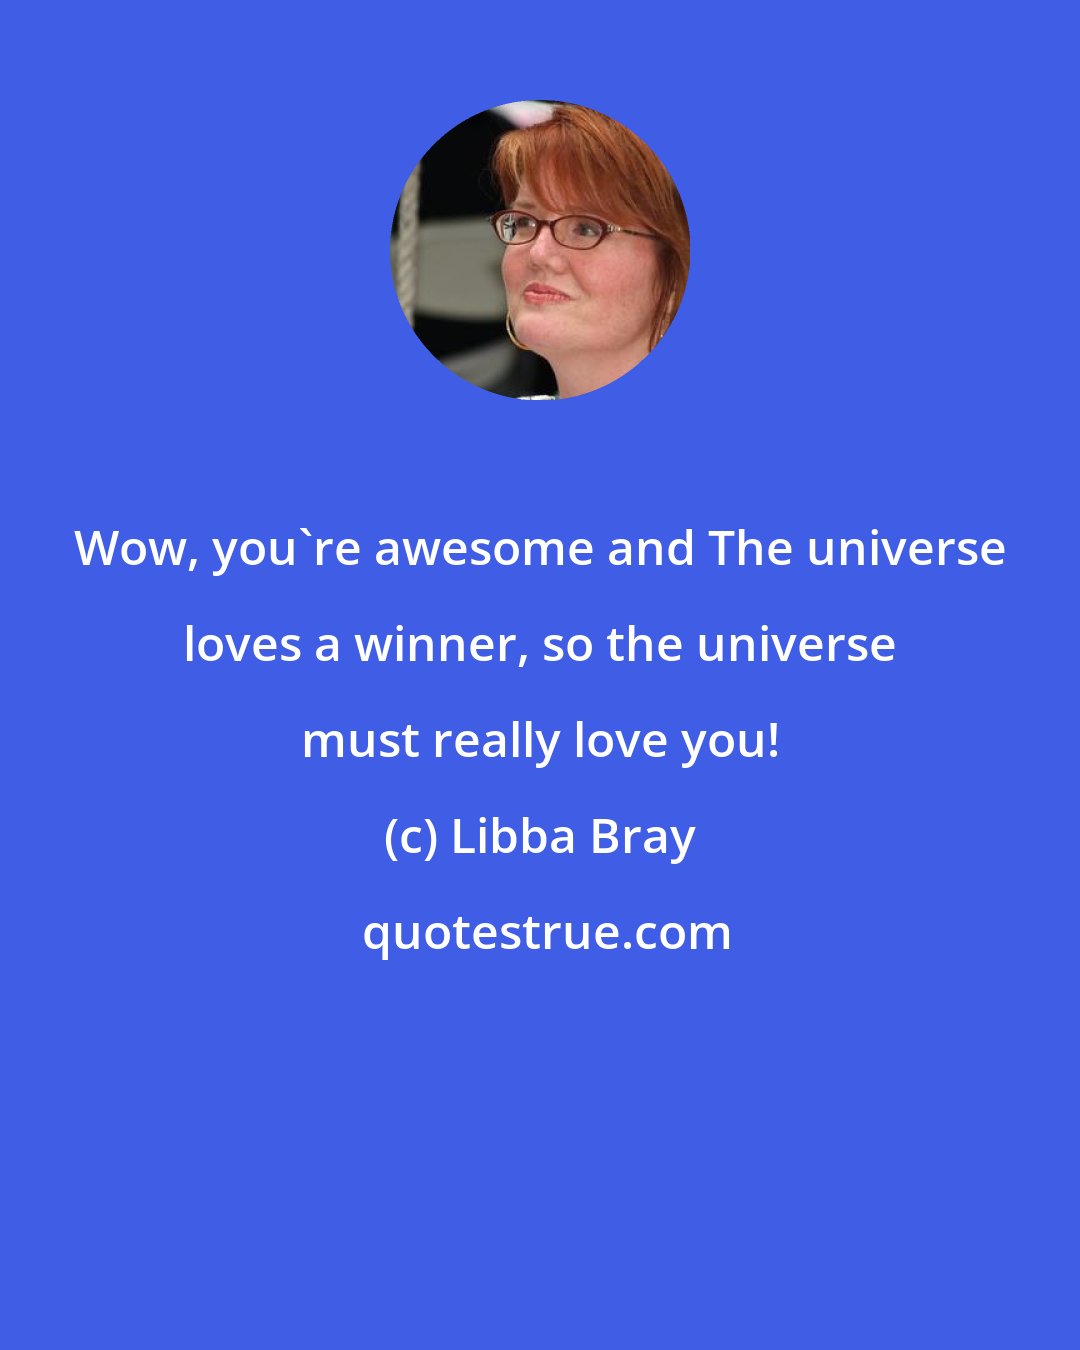 Libba Bray: Wow, you're awesome and The universe loves a winner, so the universe must really love you!